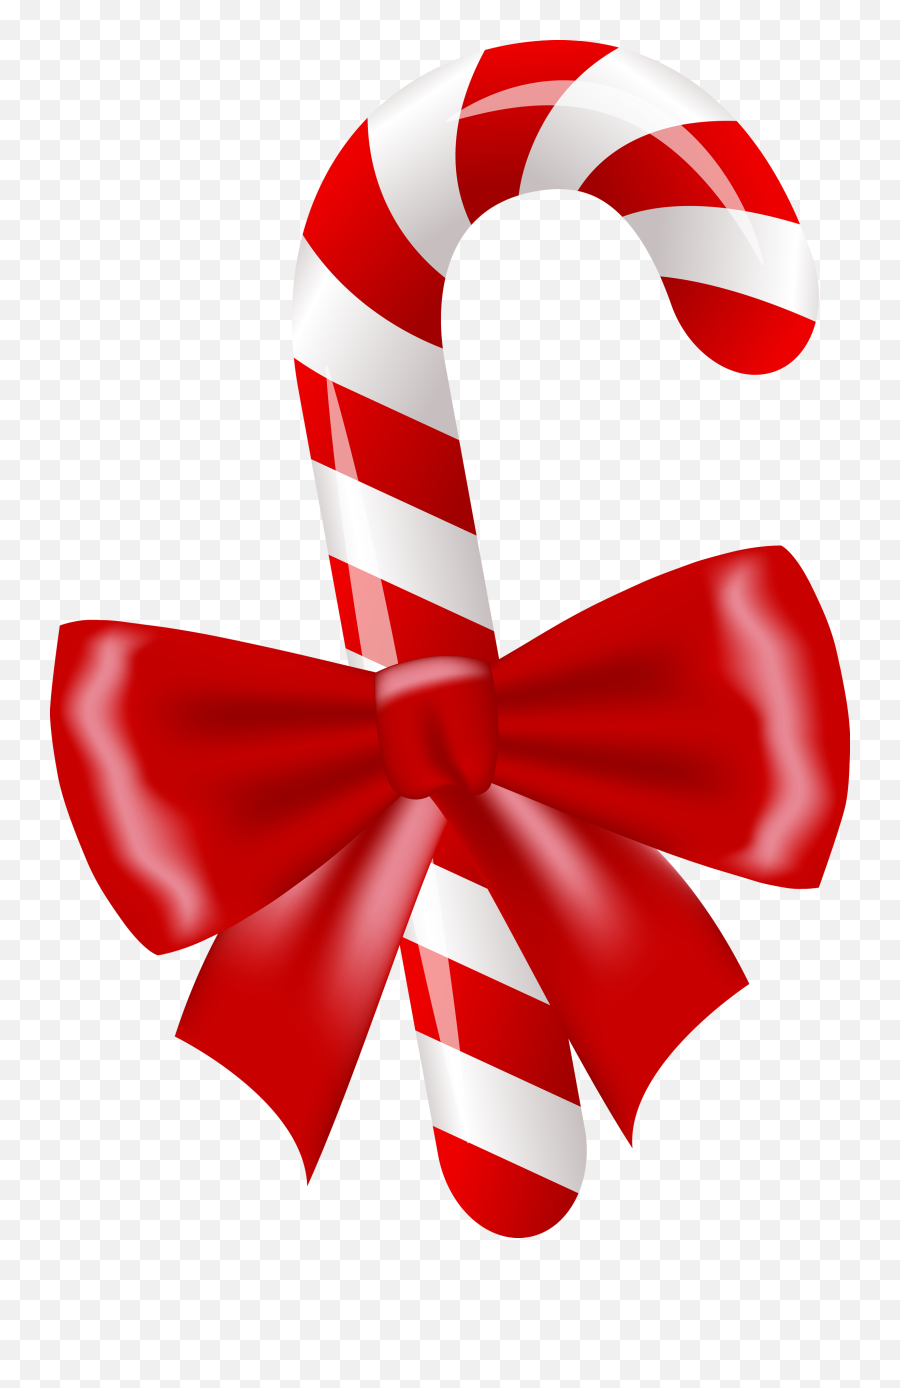 Candy Cane Clipart Free Download Candy Canepng Images - Christmas Candy Cane Clipart Png Emoji,Candycane Emoji